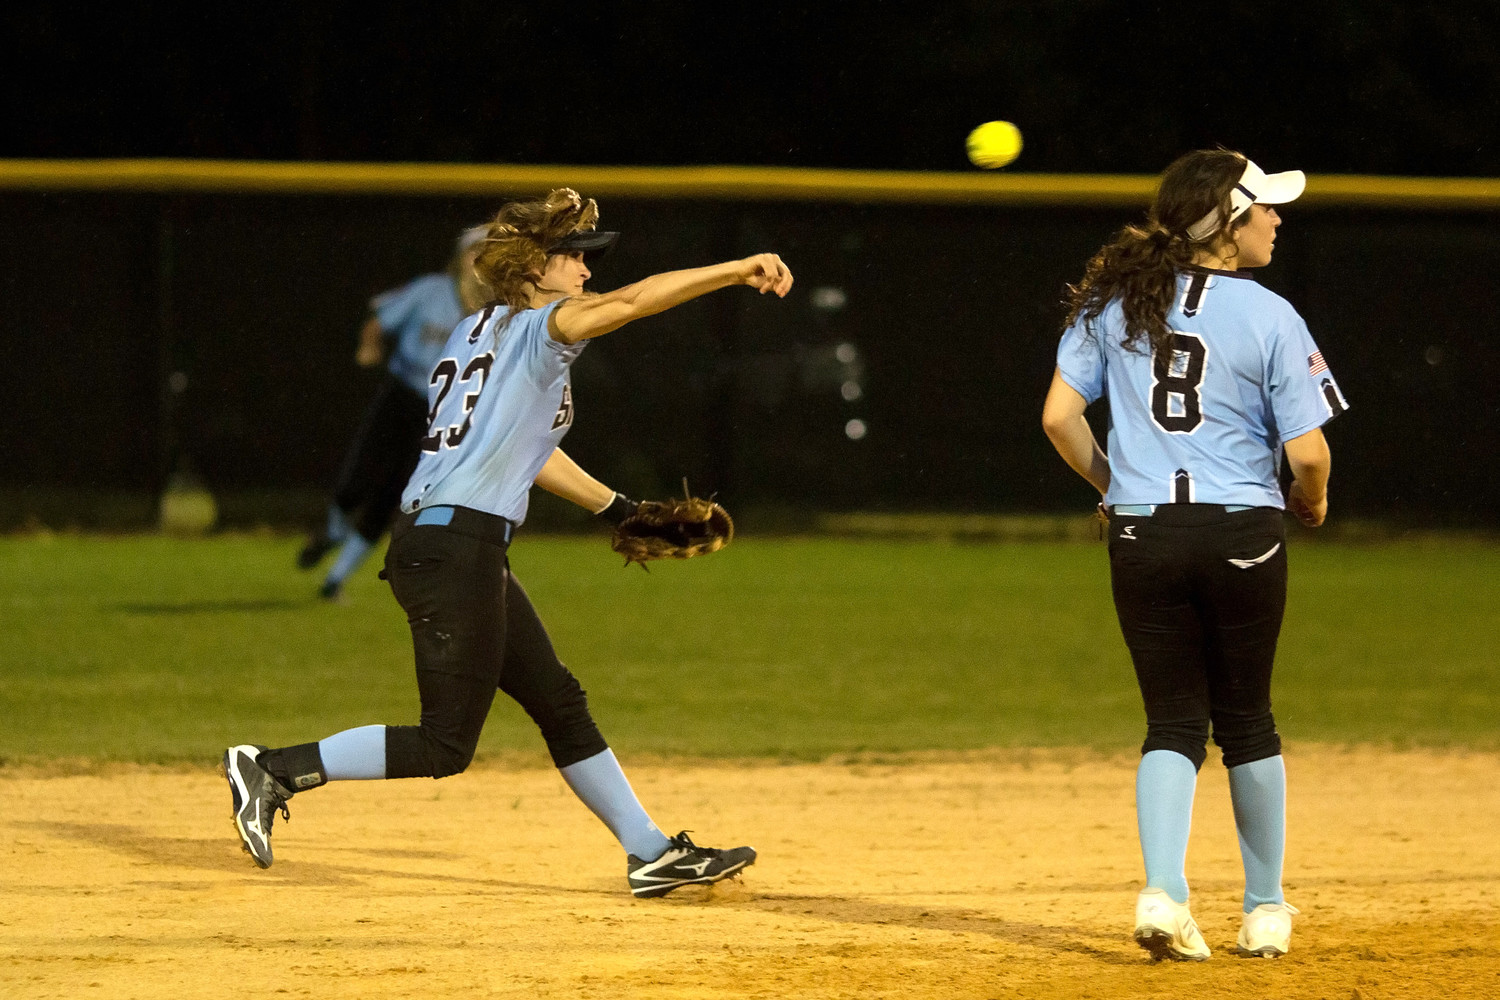 Kiley Hennessey makes the throw to first on a ground ball.